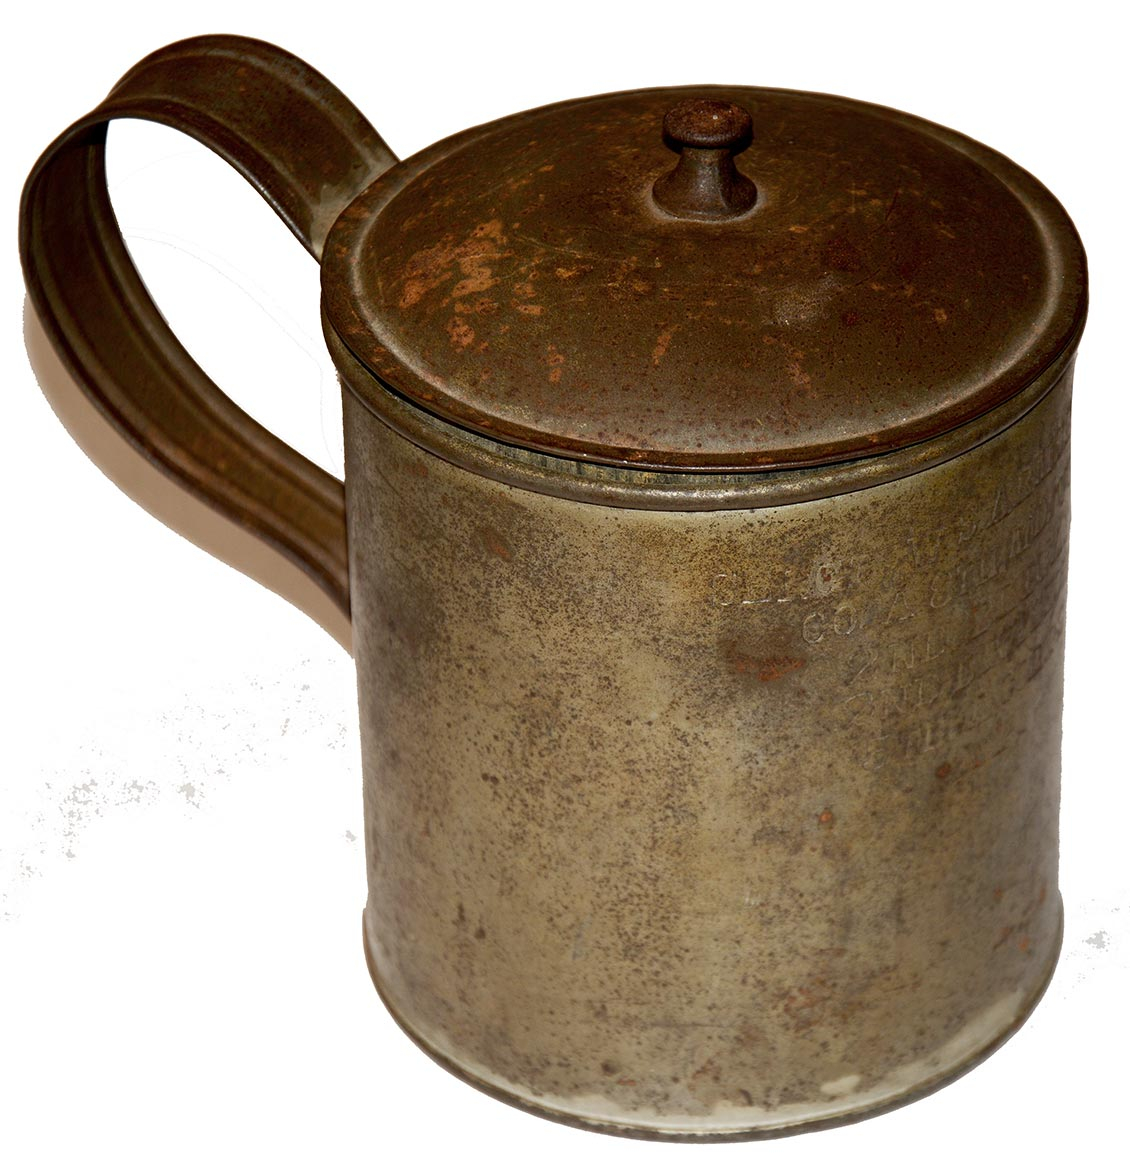 WORLD CLASS ID’D MARYLAND SOLDIER’S BOILER/MESS CUP WITH LID